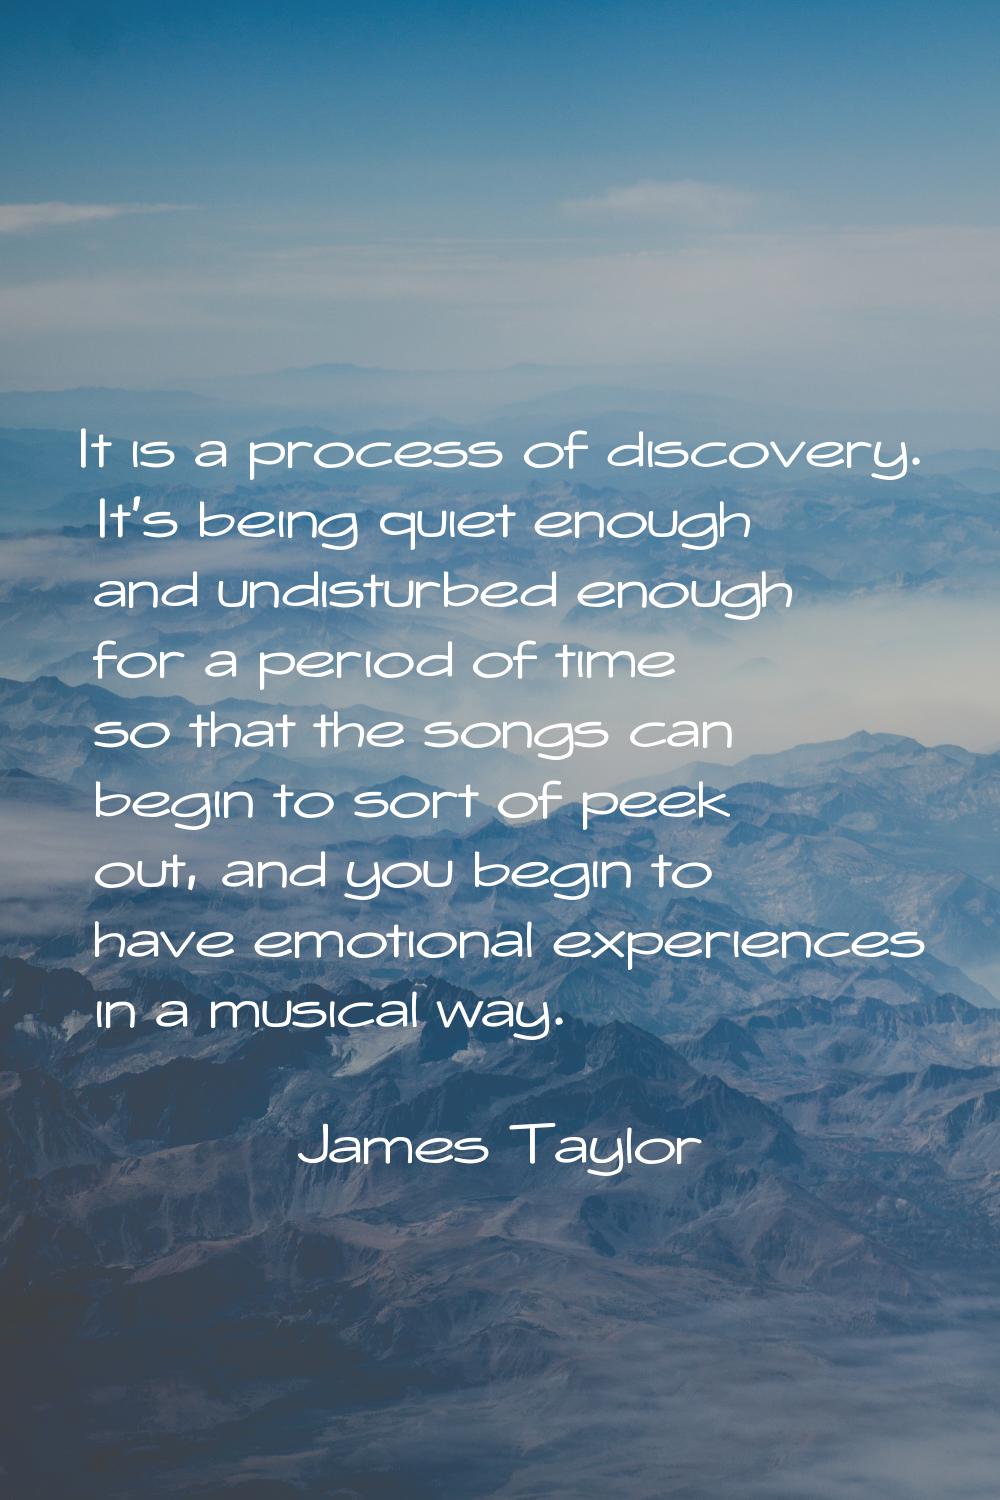 It is a process of discovery. It's being quiet enough and undisturbed enough for a period of time s